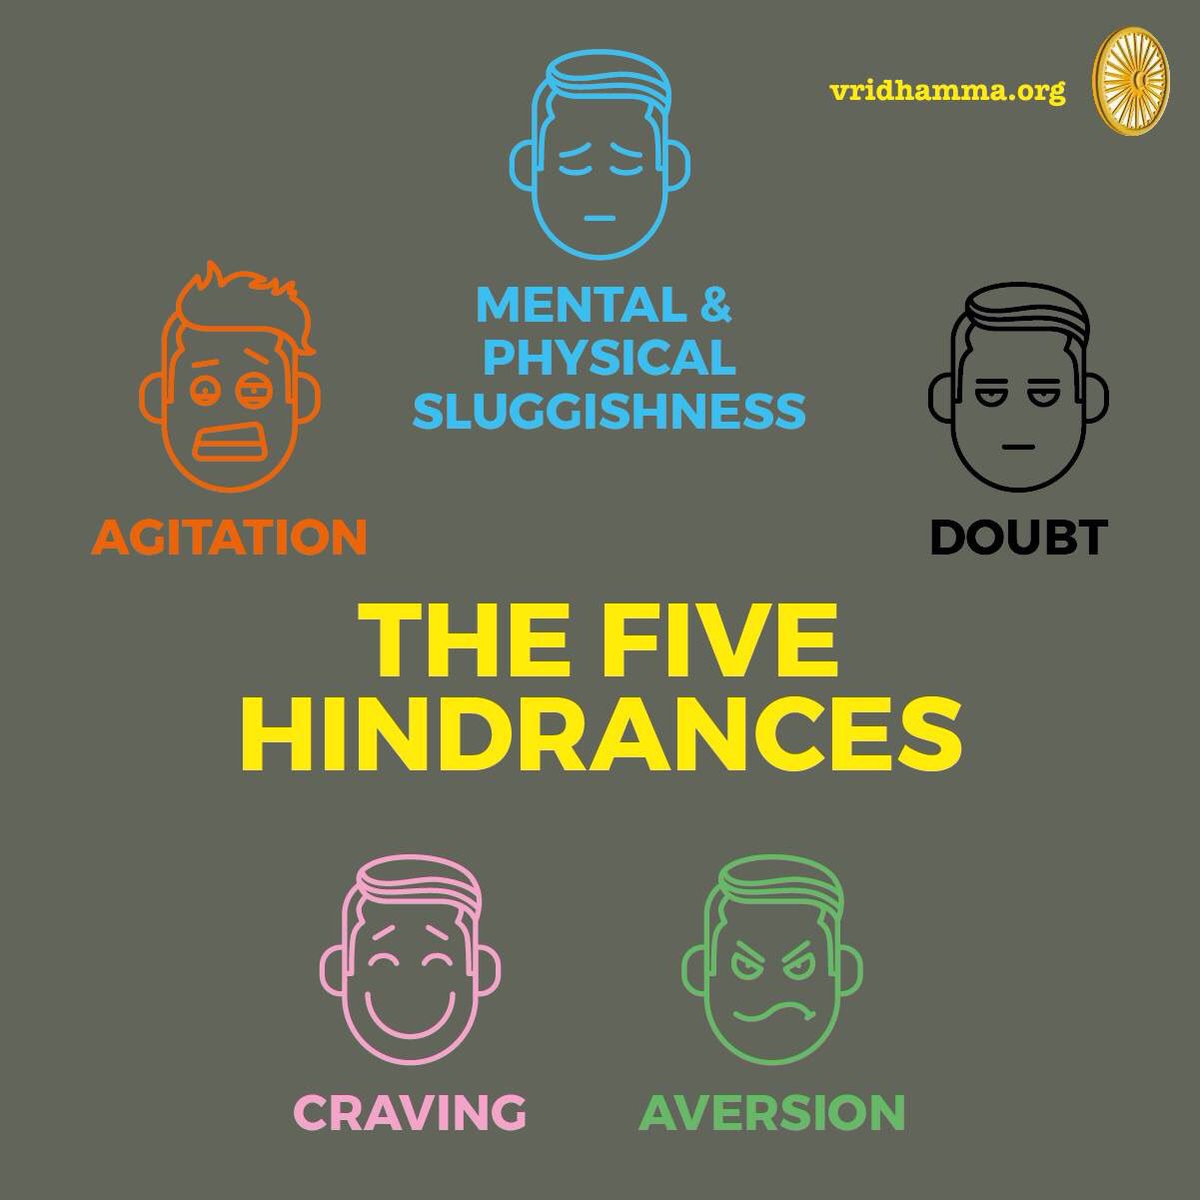 The Pali term for these hindrances is: “Panca Nivaranani.” Panca means five, and the closest translation for ‘nivaranani’ is “TO OVERWHELM.” Therefore, the five hindrances often can, and unfortunately USUALLY DO succeed in thwarting us, in sending us to our mortal coil...